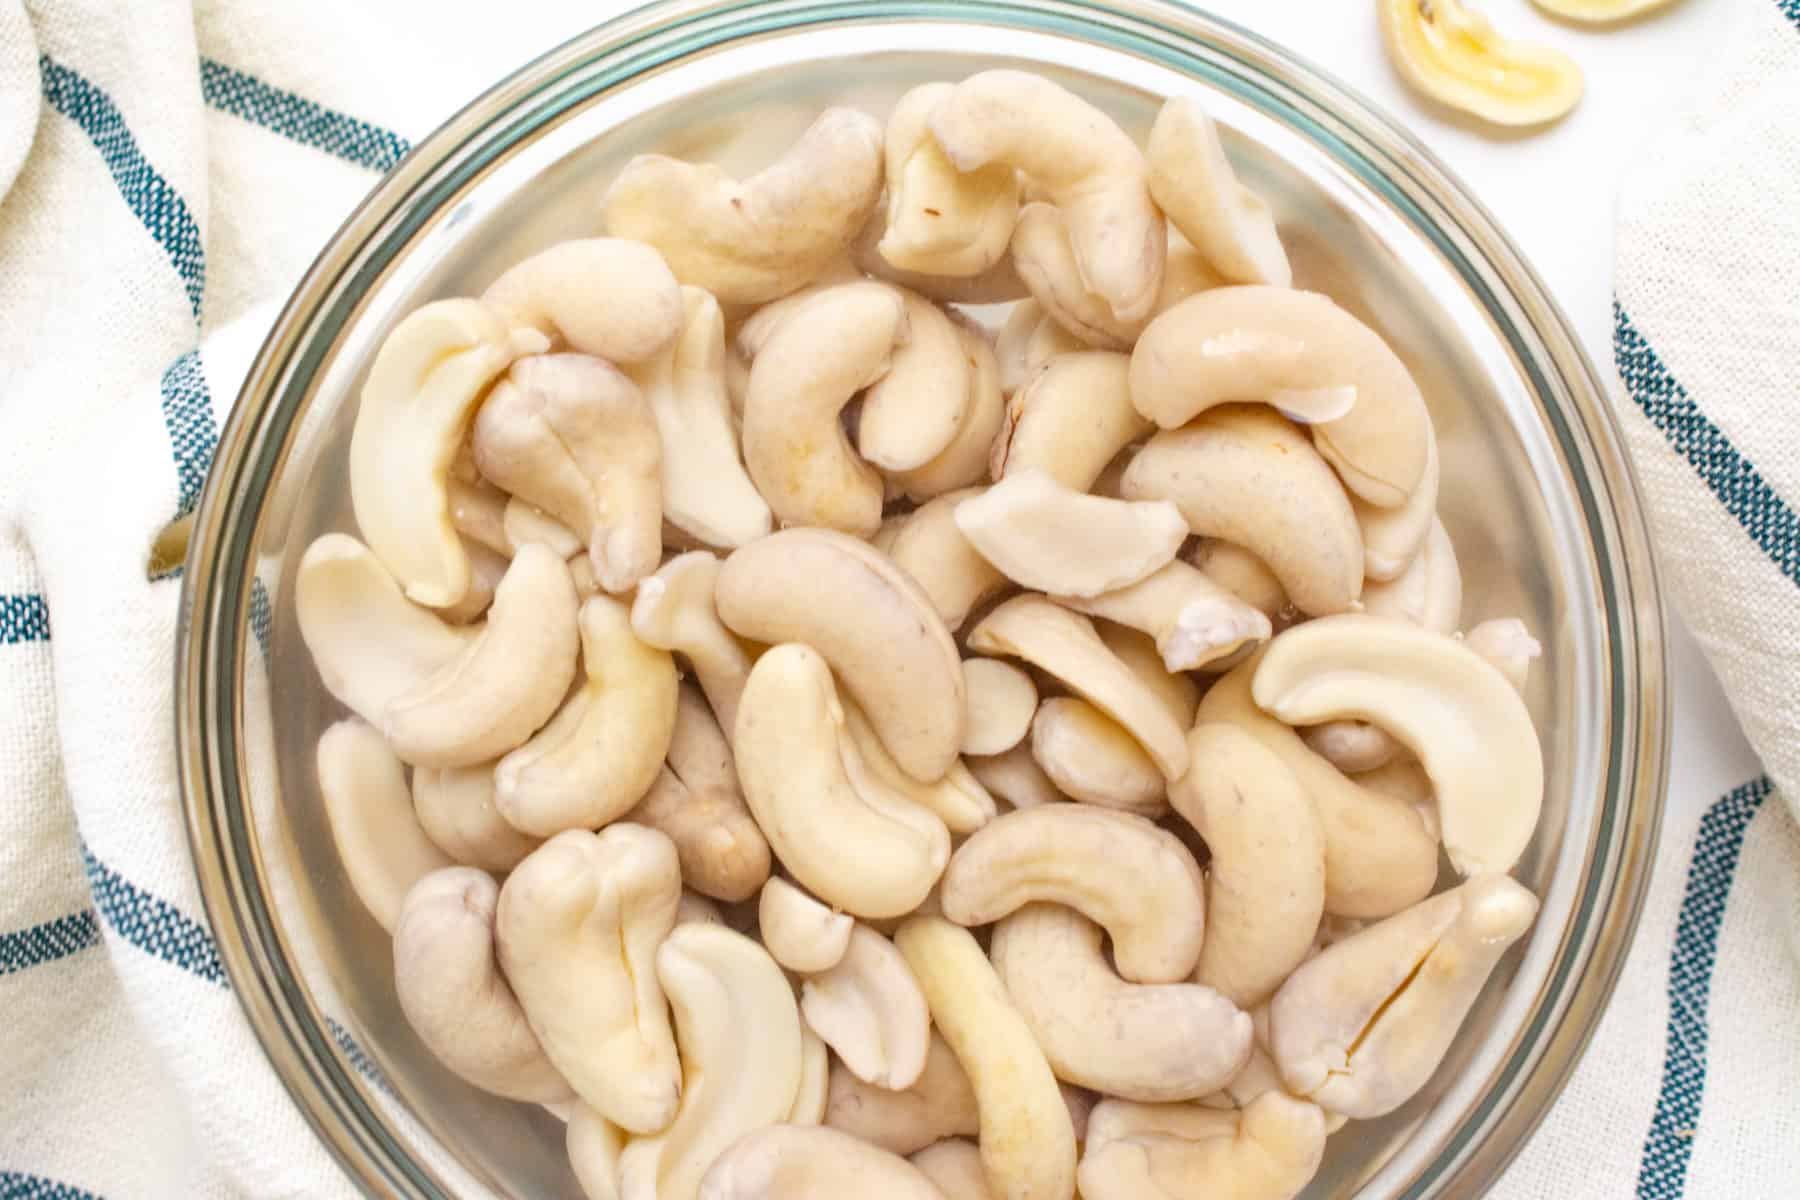 Raw cashews in a glass bowl soaking in room temperature water.